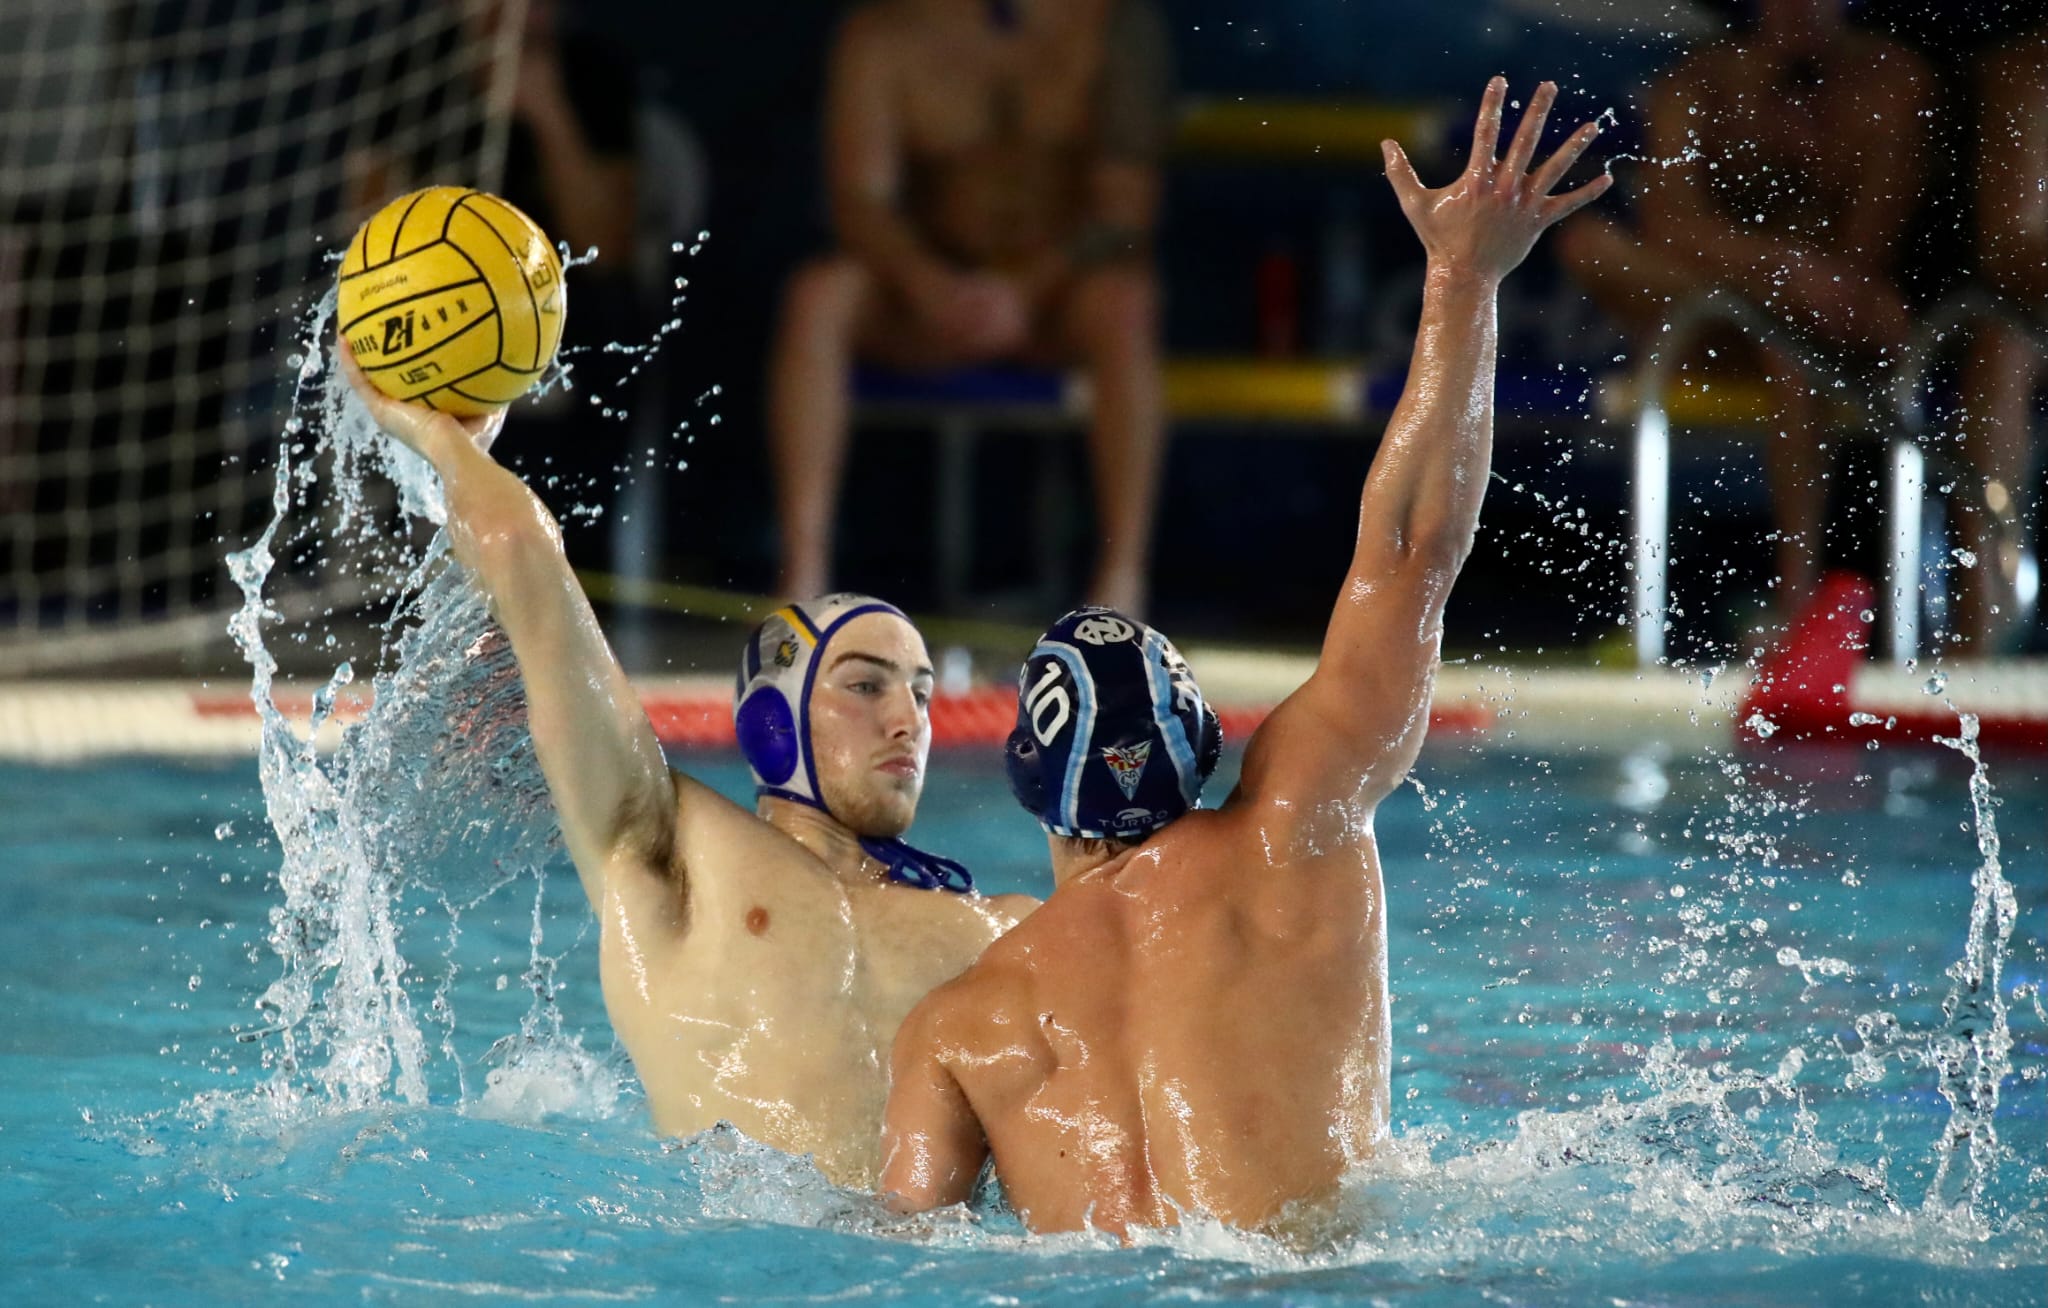 LEWaterpolo J15 (5)